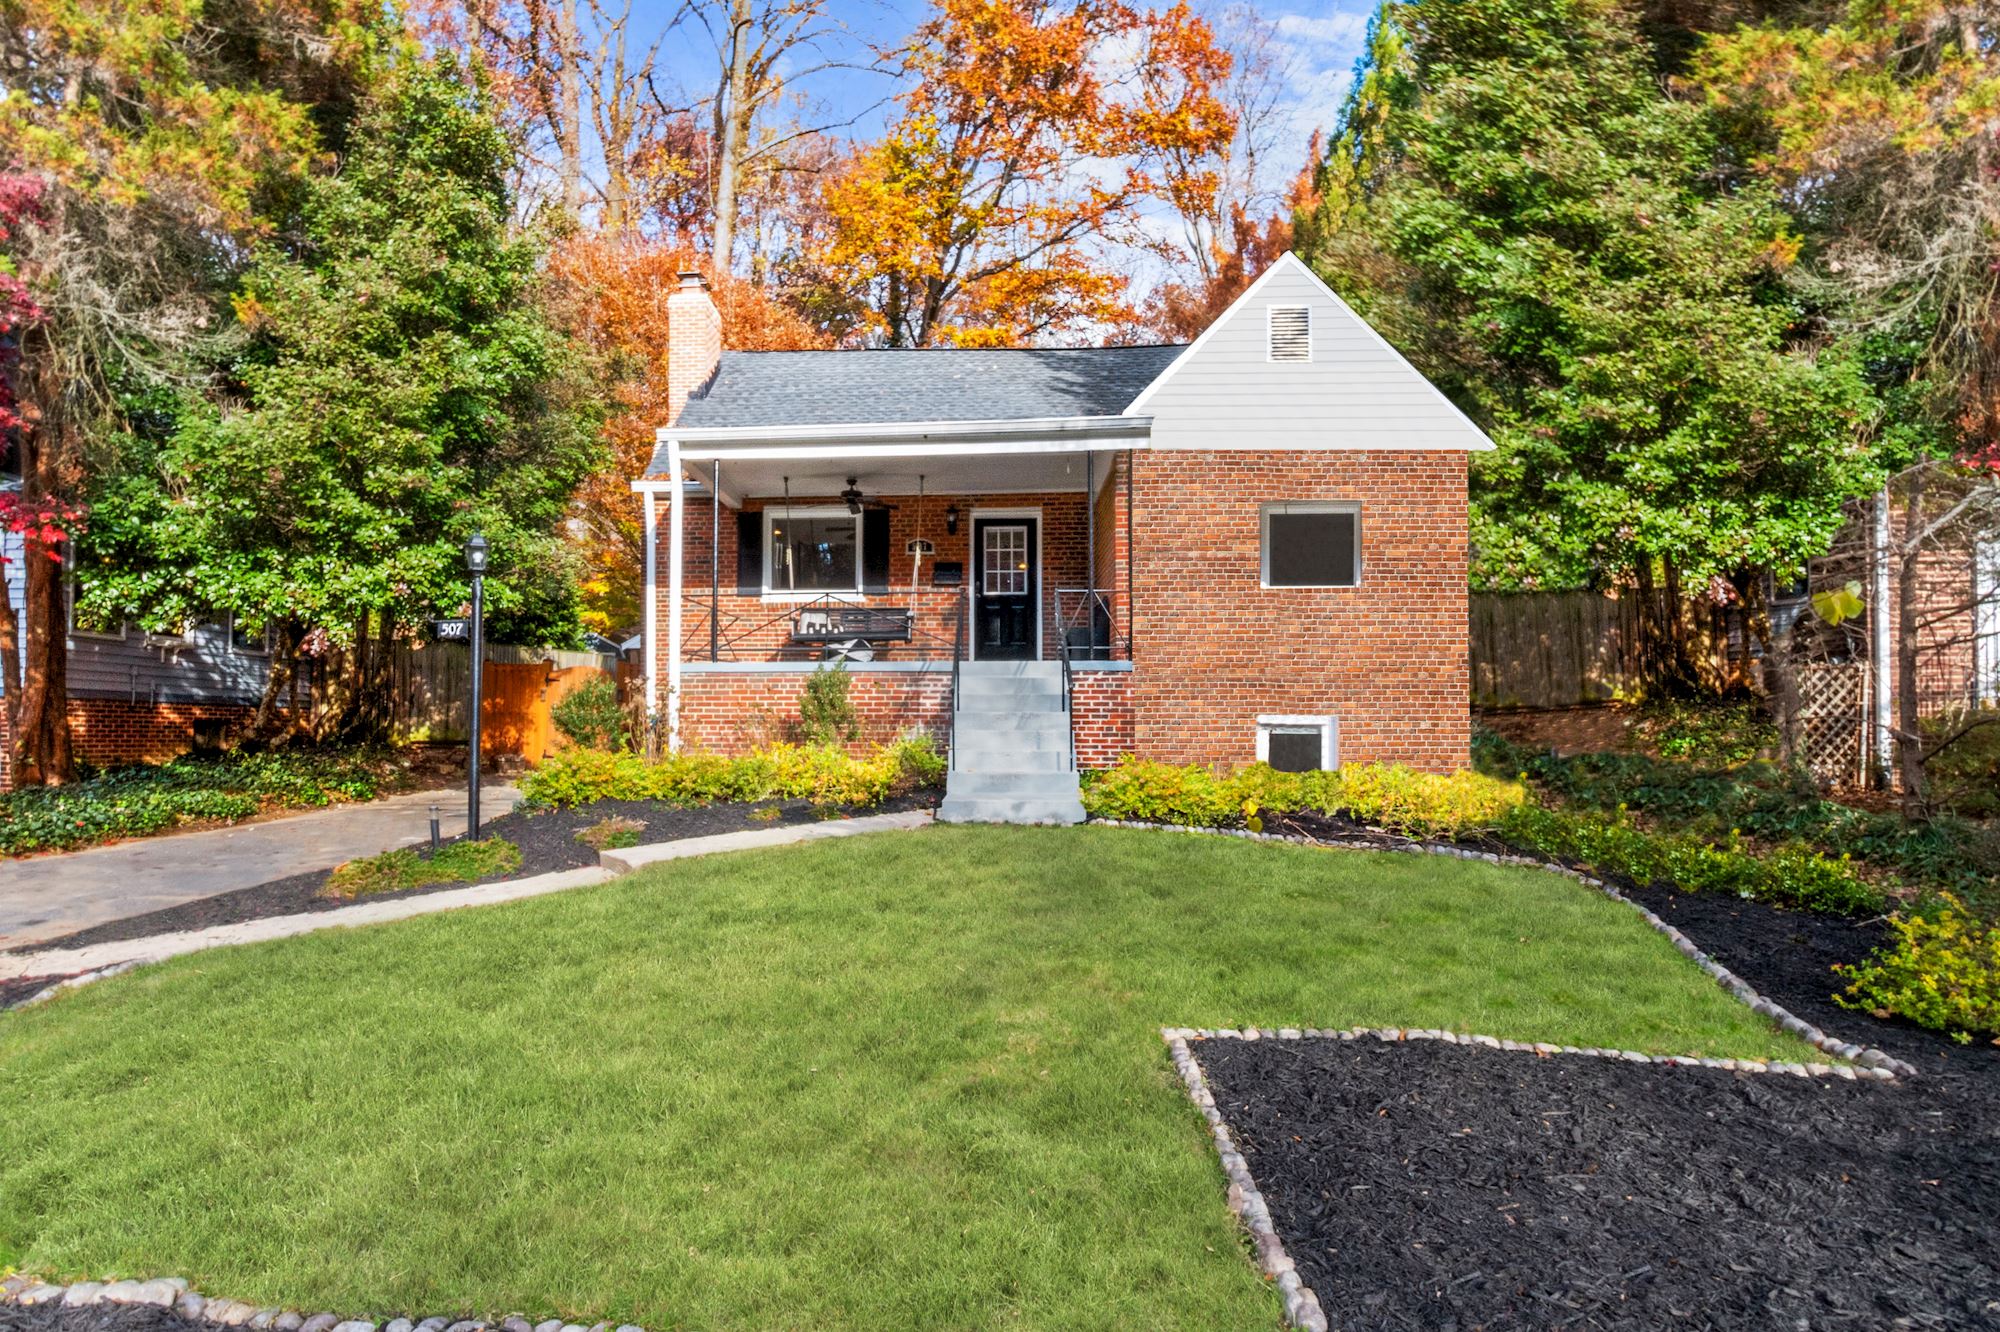 Large & Gorgeously Renovated Home in Silver Spring